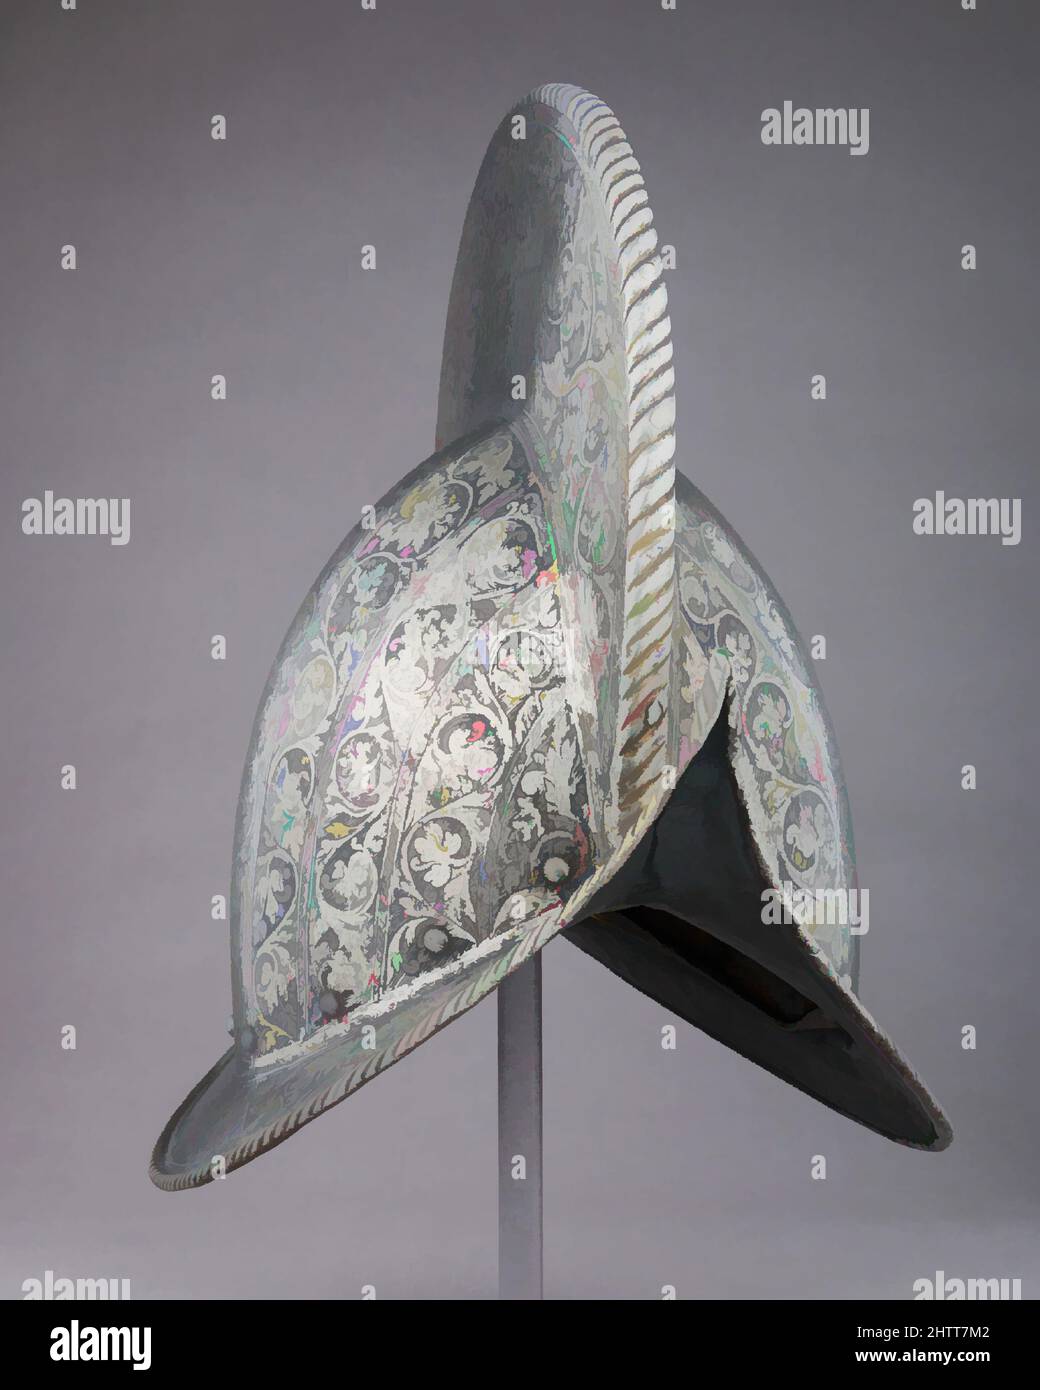 Art inspired by Morion, ca. 1575, French, Steel, leather, H. 13 1/16 in. (33.2 cm); W. 9 11/16 in. (24.6 cm); D. 13 1/2 in. (34.3 cm); Wt. 3 lb. 15 oz. (1773 g), Helmets, Classic works modernized by Artotop with a splash of modernity. Shapes, color and value, eye-catching visual impact on art. Emotions through freedom of artworks in a contemporary way. A timeless message pursuing a wildly creative new direction. Artists turning to the digital medium and creating the Artotop NFT Stock Photo